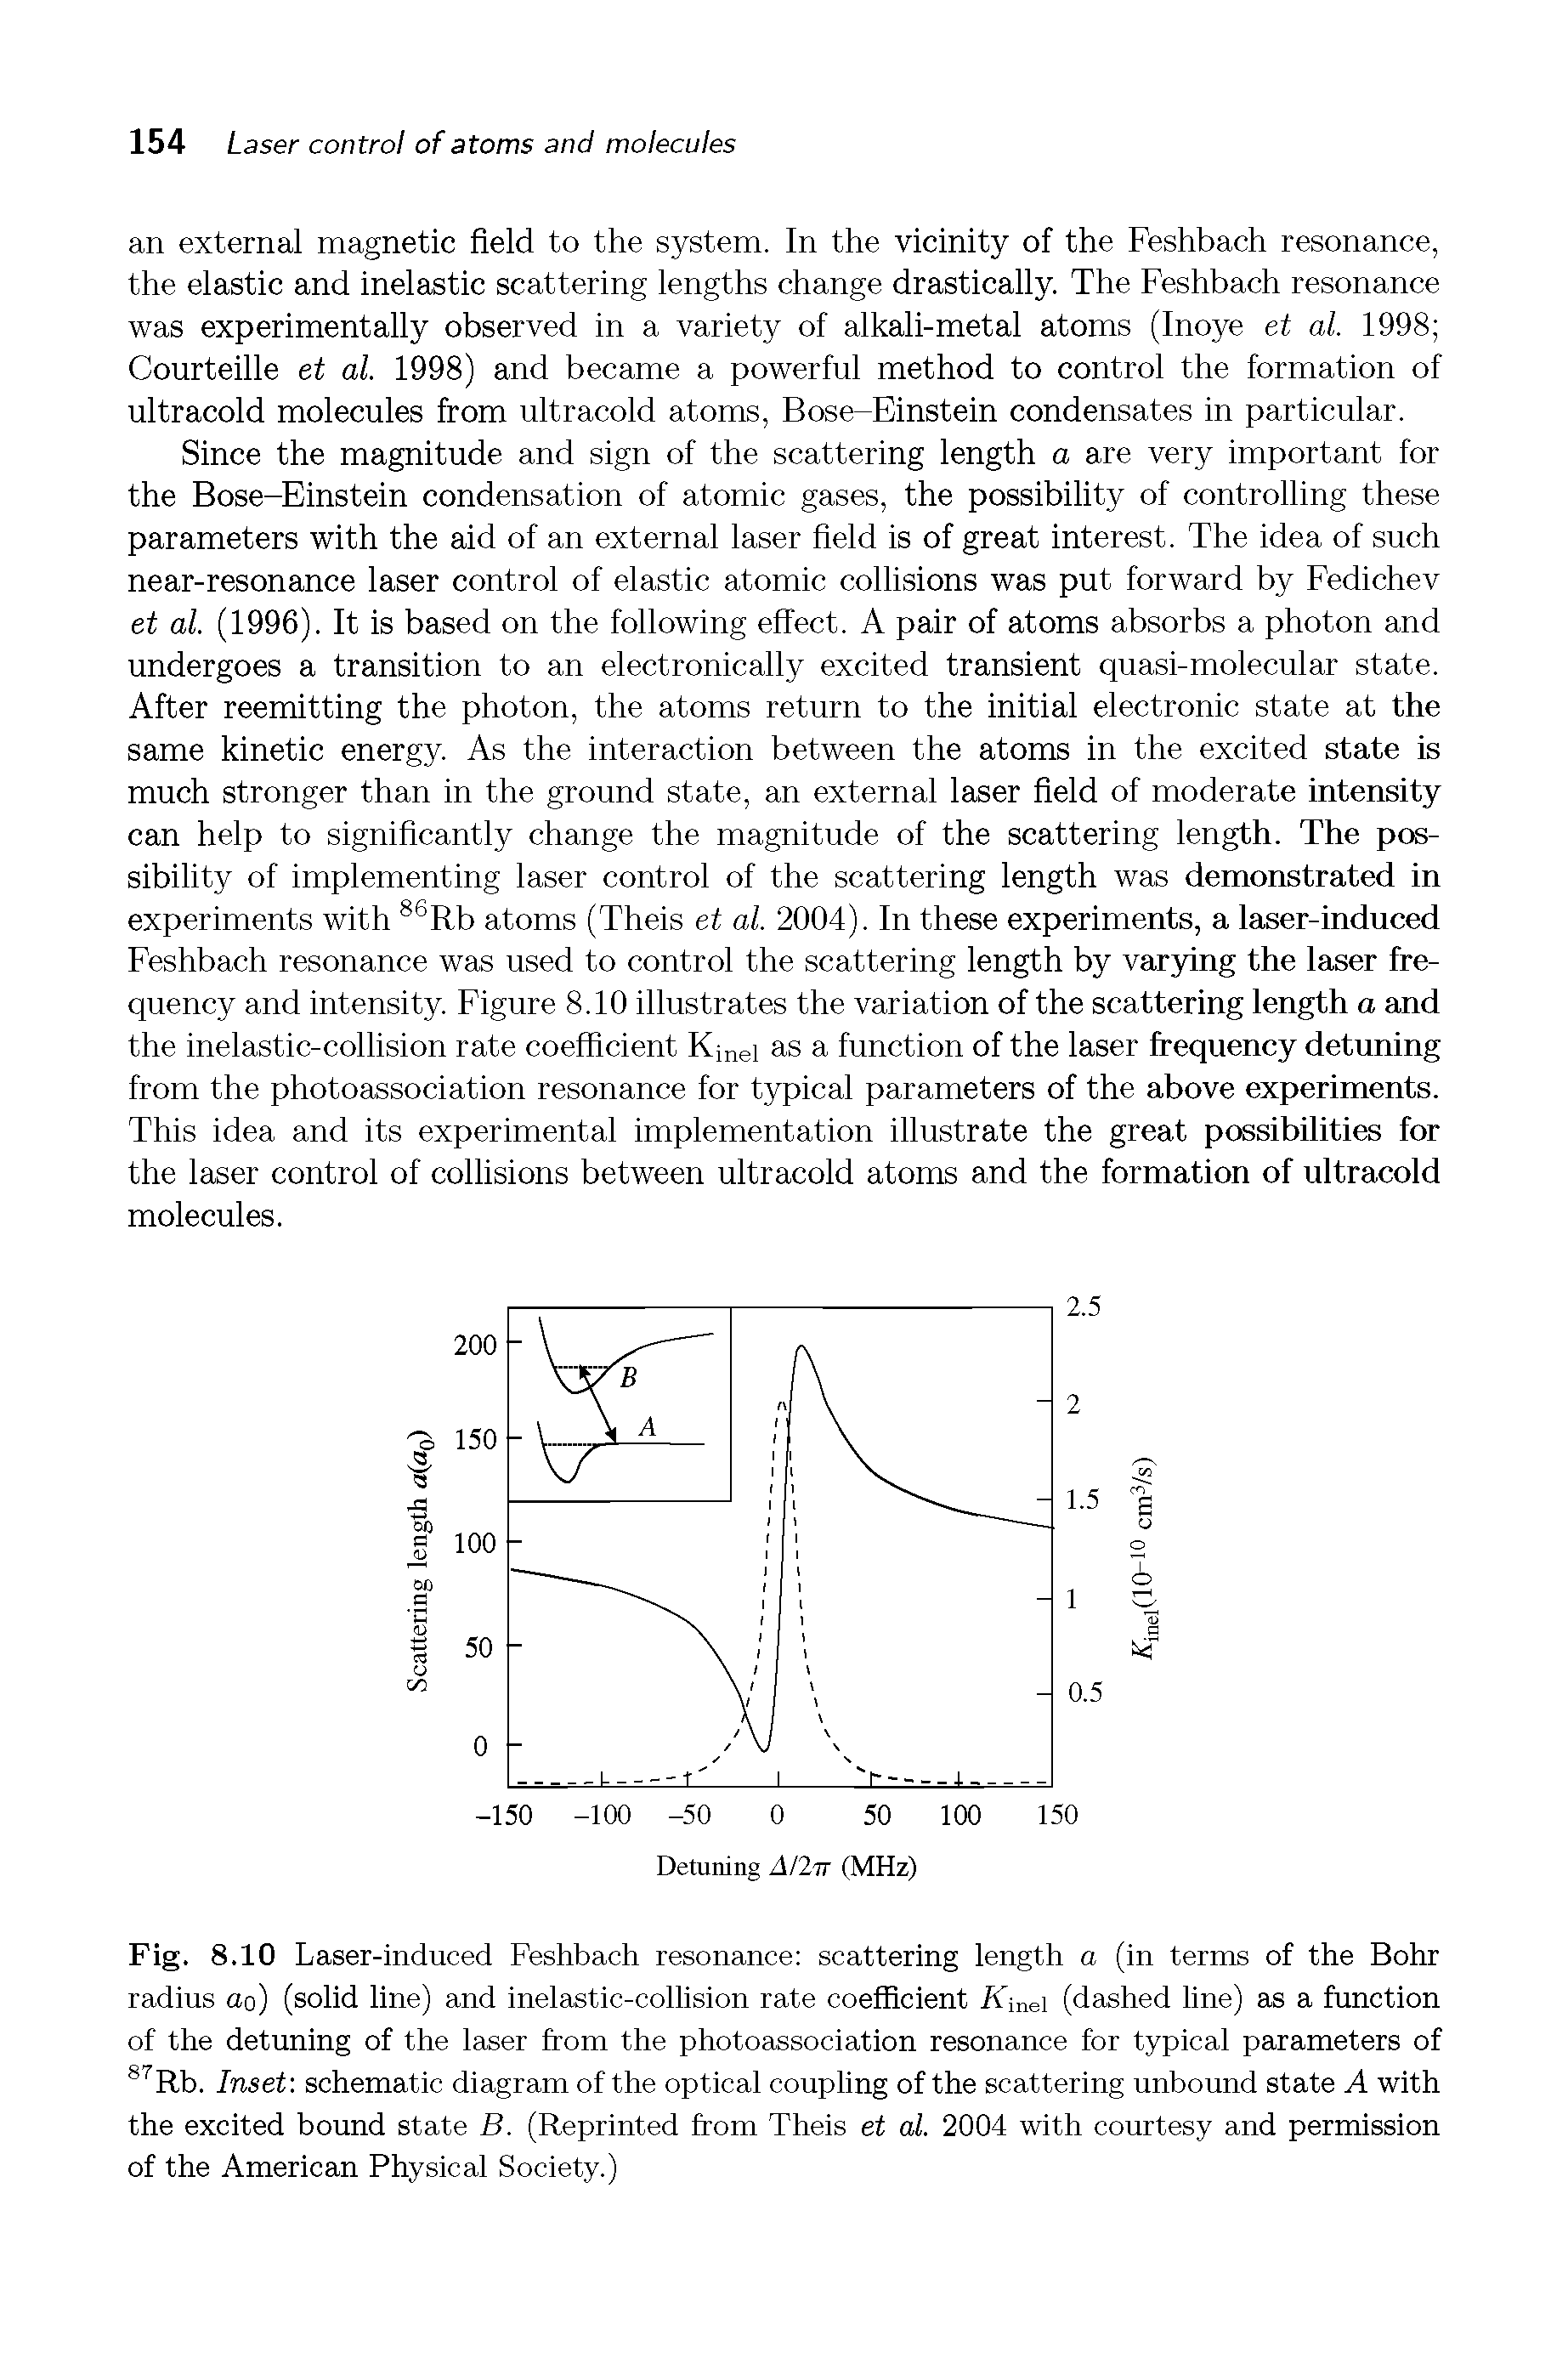 Fig. 8.10 Laser-induced Feshbach resonance scattering length a (in terms of the Bohr radius ao) (solid line) and inelastic-collision rate coefficient Ainei (dashed line) as a function of the detiming of the laser from the photoassociation resonance for typical parameters of Inset schematic diagram of the optical coupling of the scattering unbound state A with the excited bound state B. (Reprinted from Theis et al. 2004 with courtesy and permission of the American Physical Society.)...